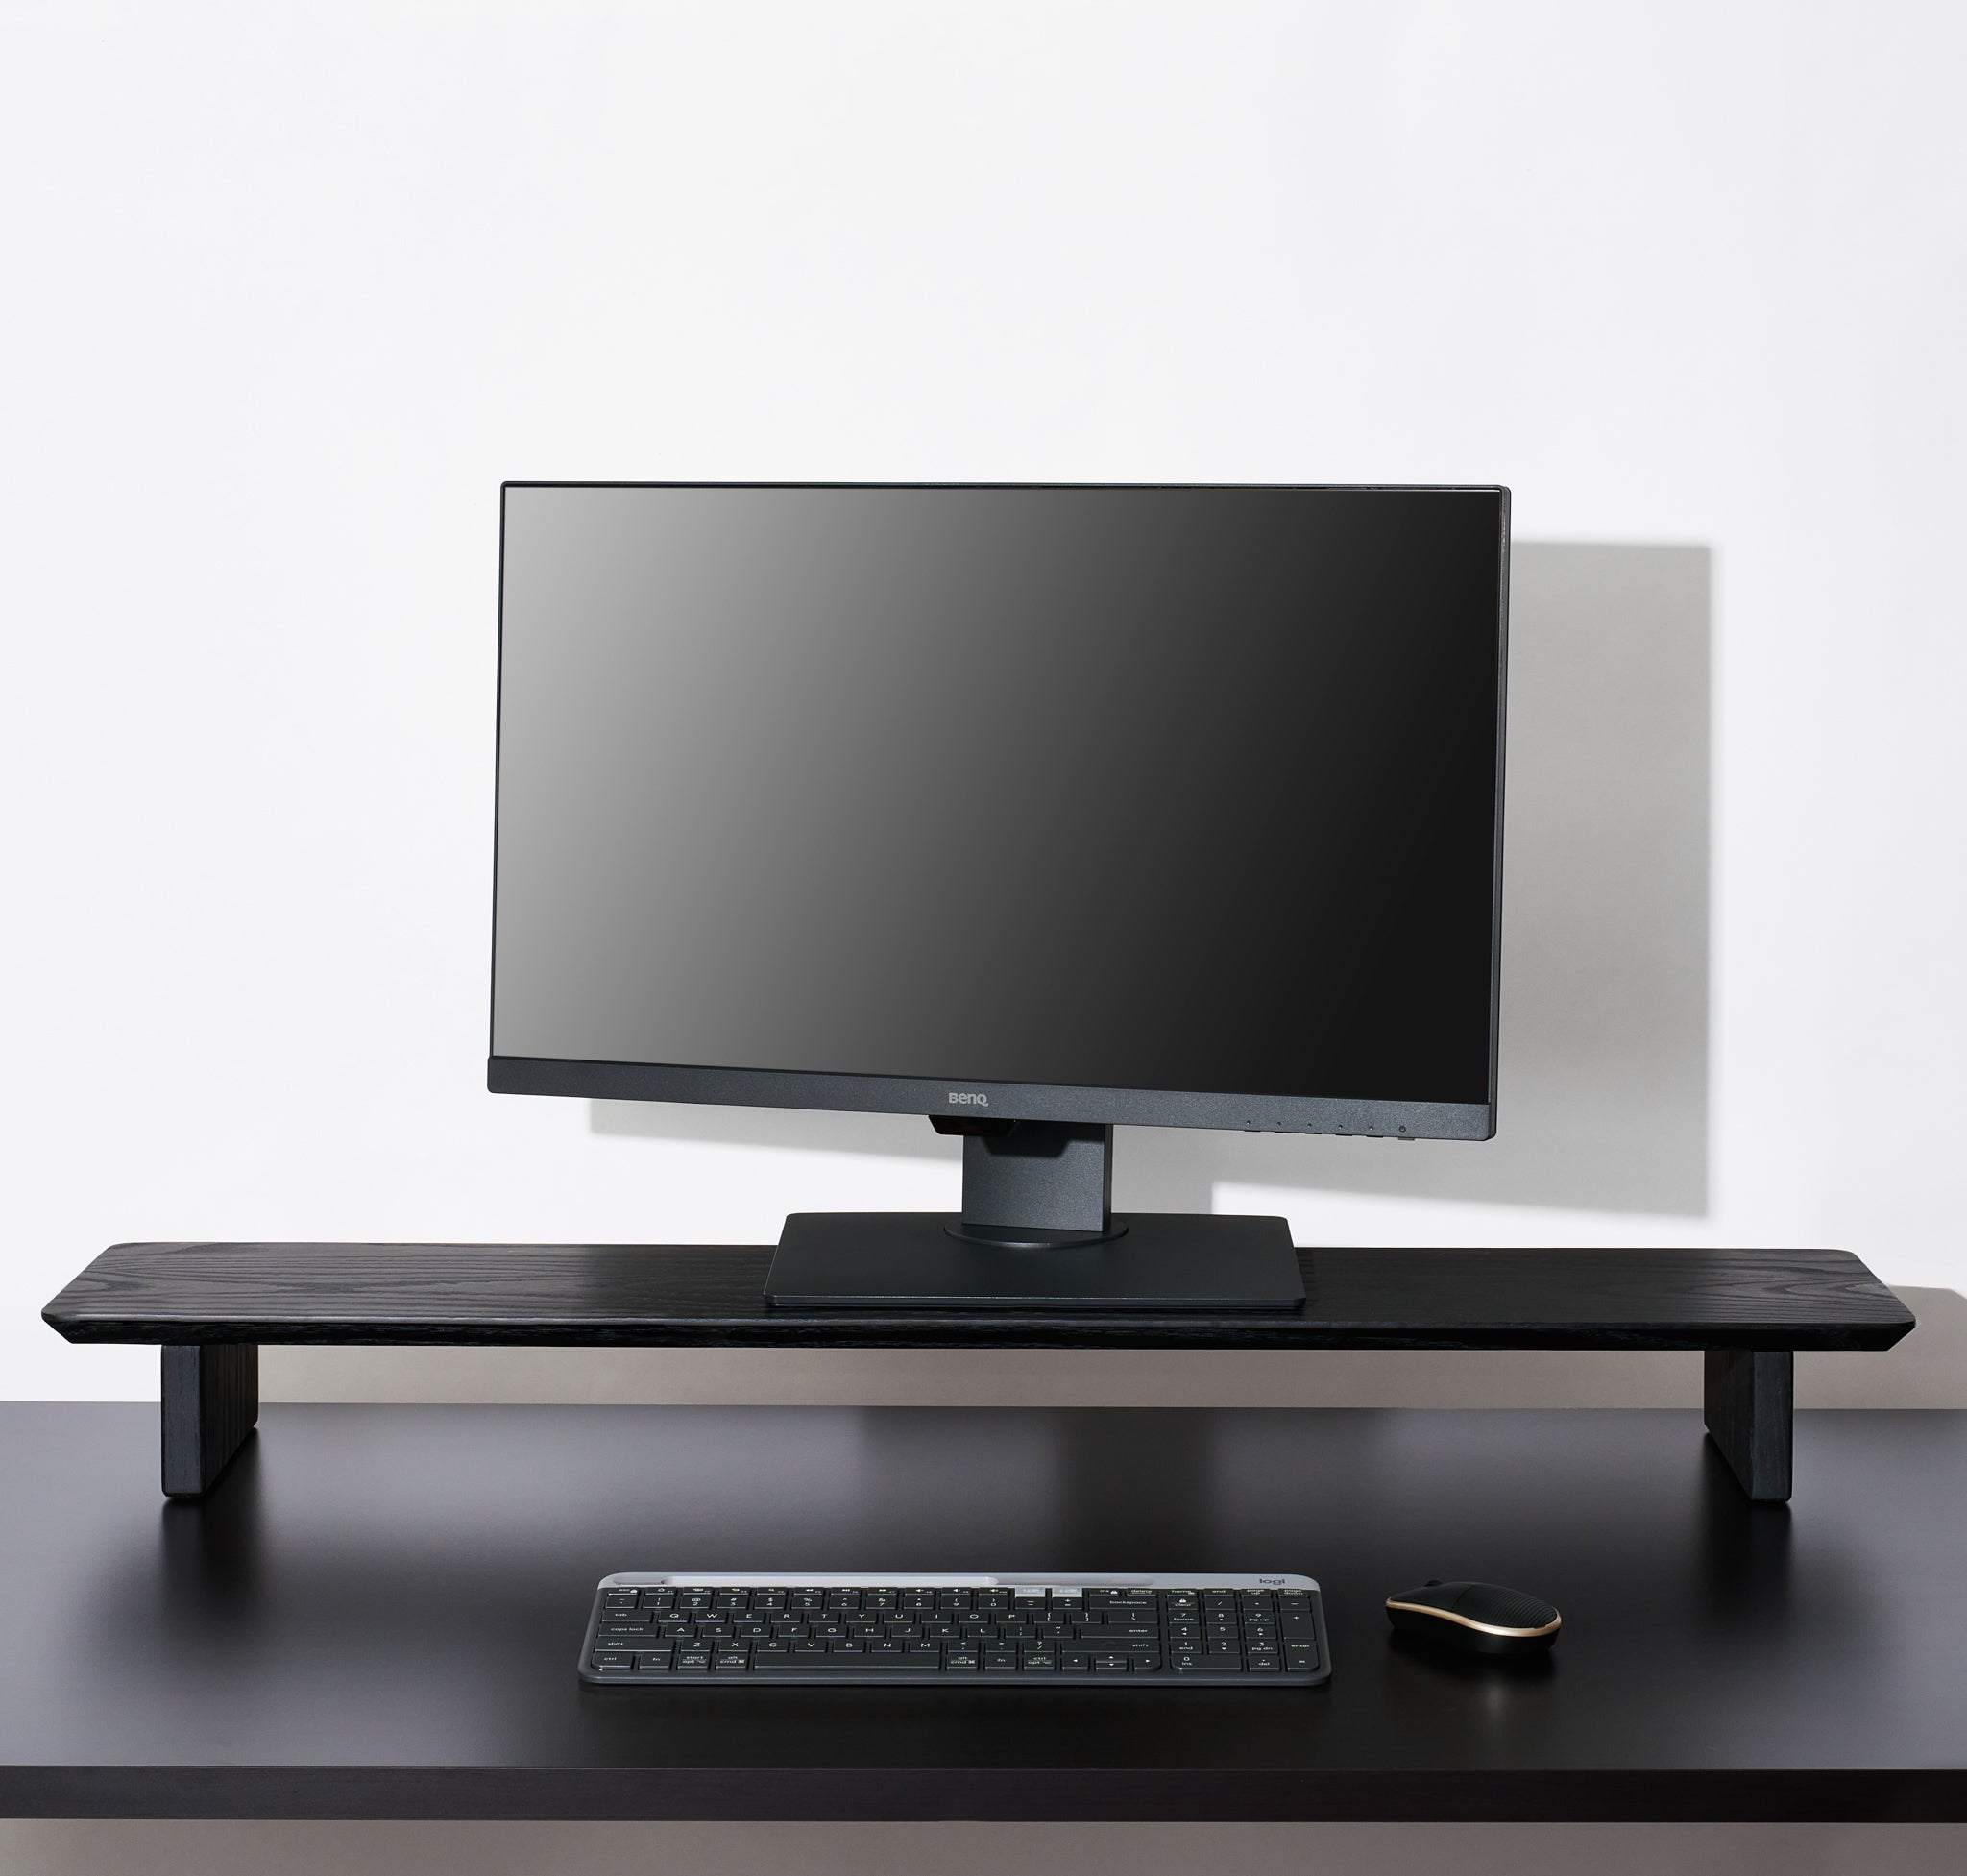 A large Black desk shelf large enough to support double monitors